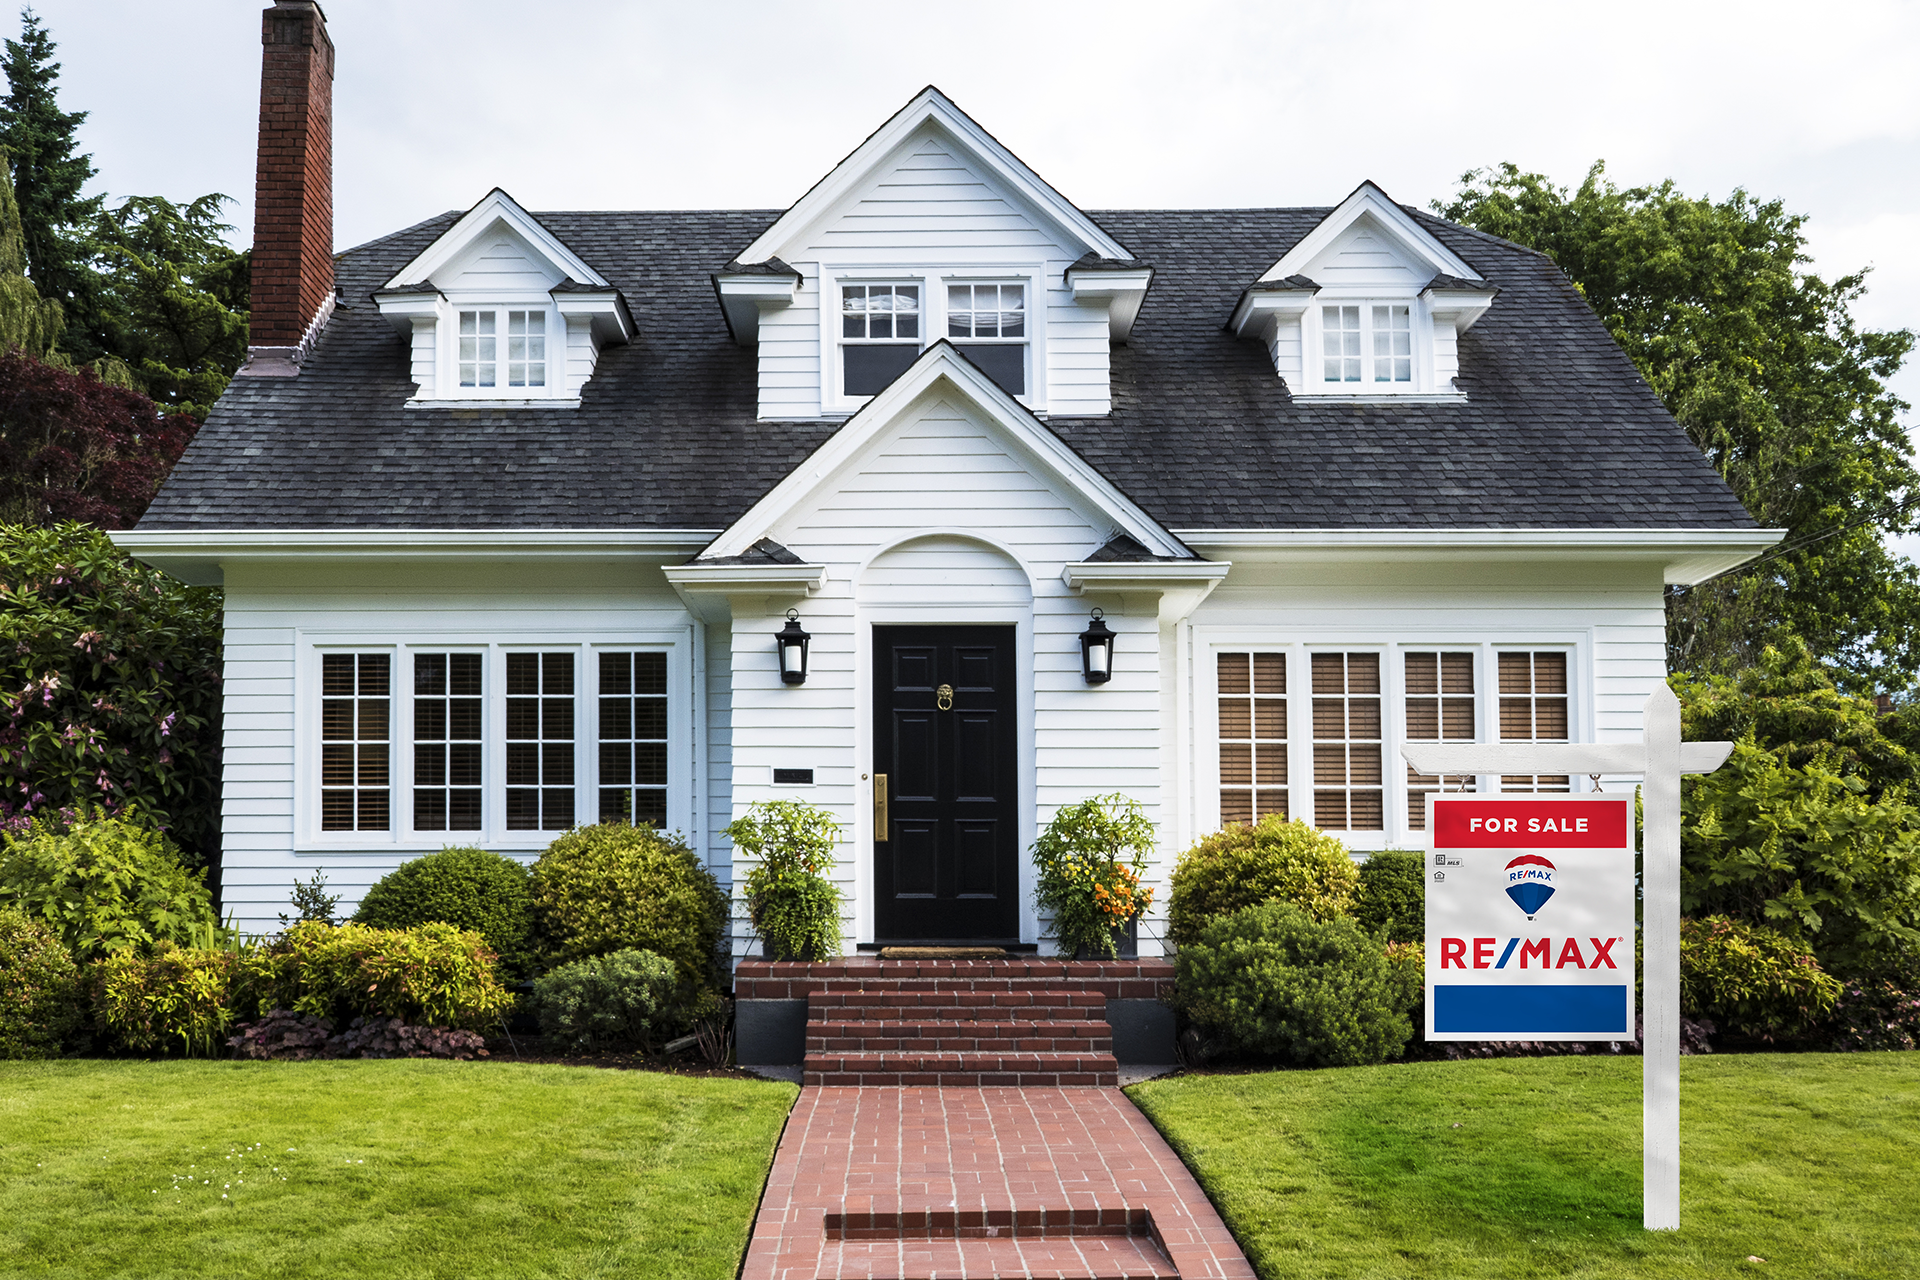 Home-Exterior-Home-for-Sale-with-Remax-Sign.png